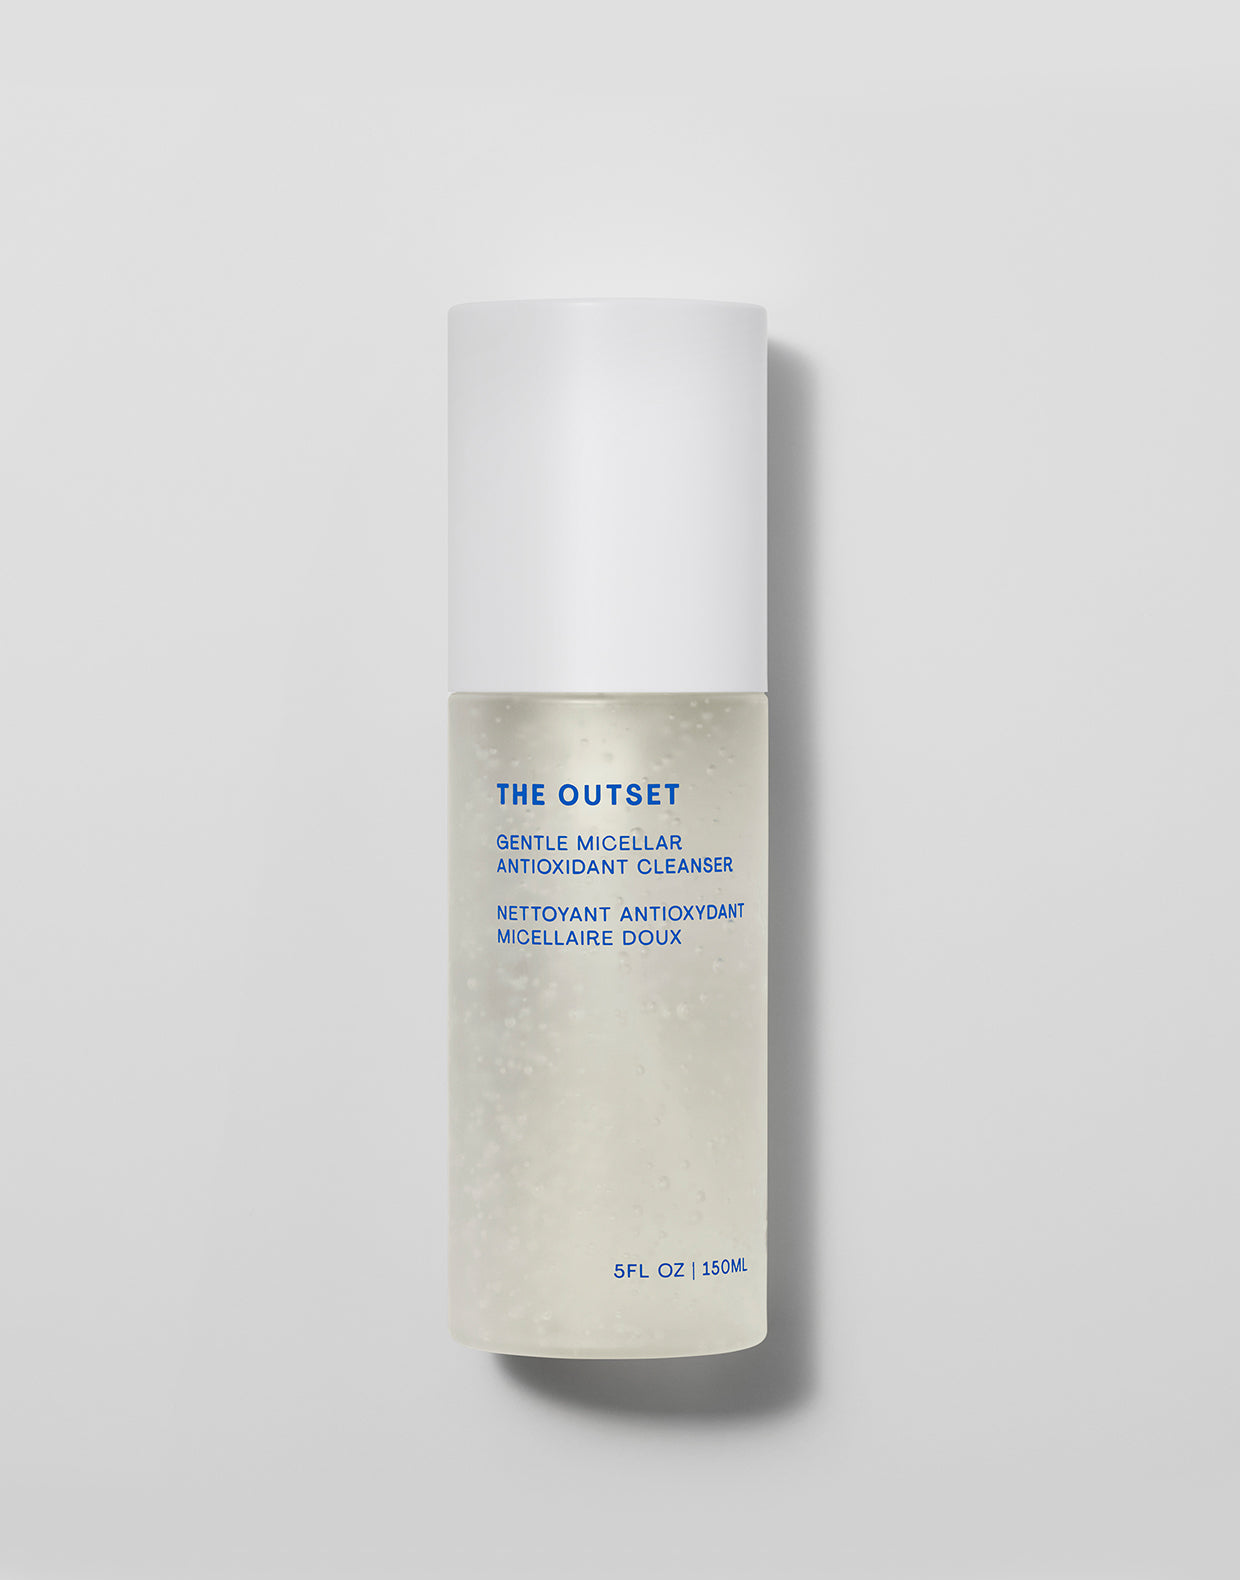 Front view photo of The Outset's Gentle Micellar Antioxidant Cleanser with cap